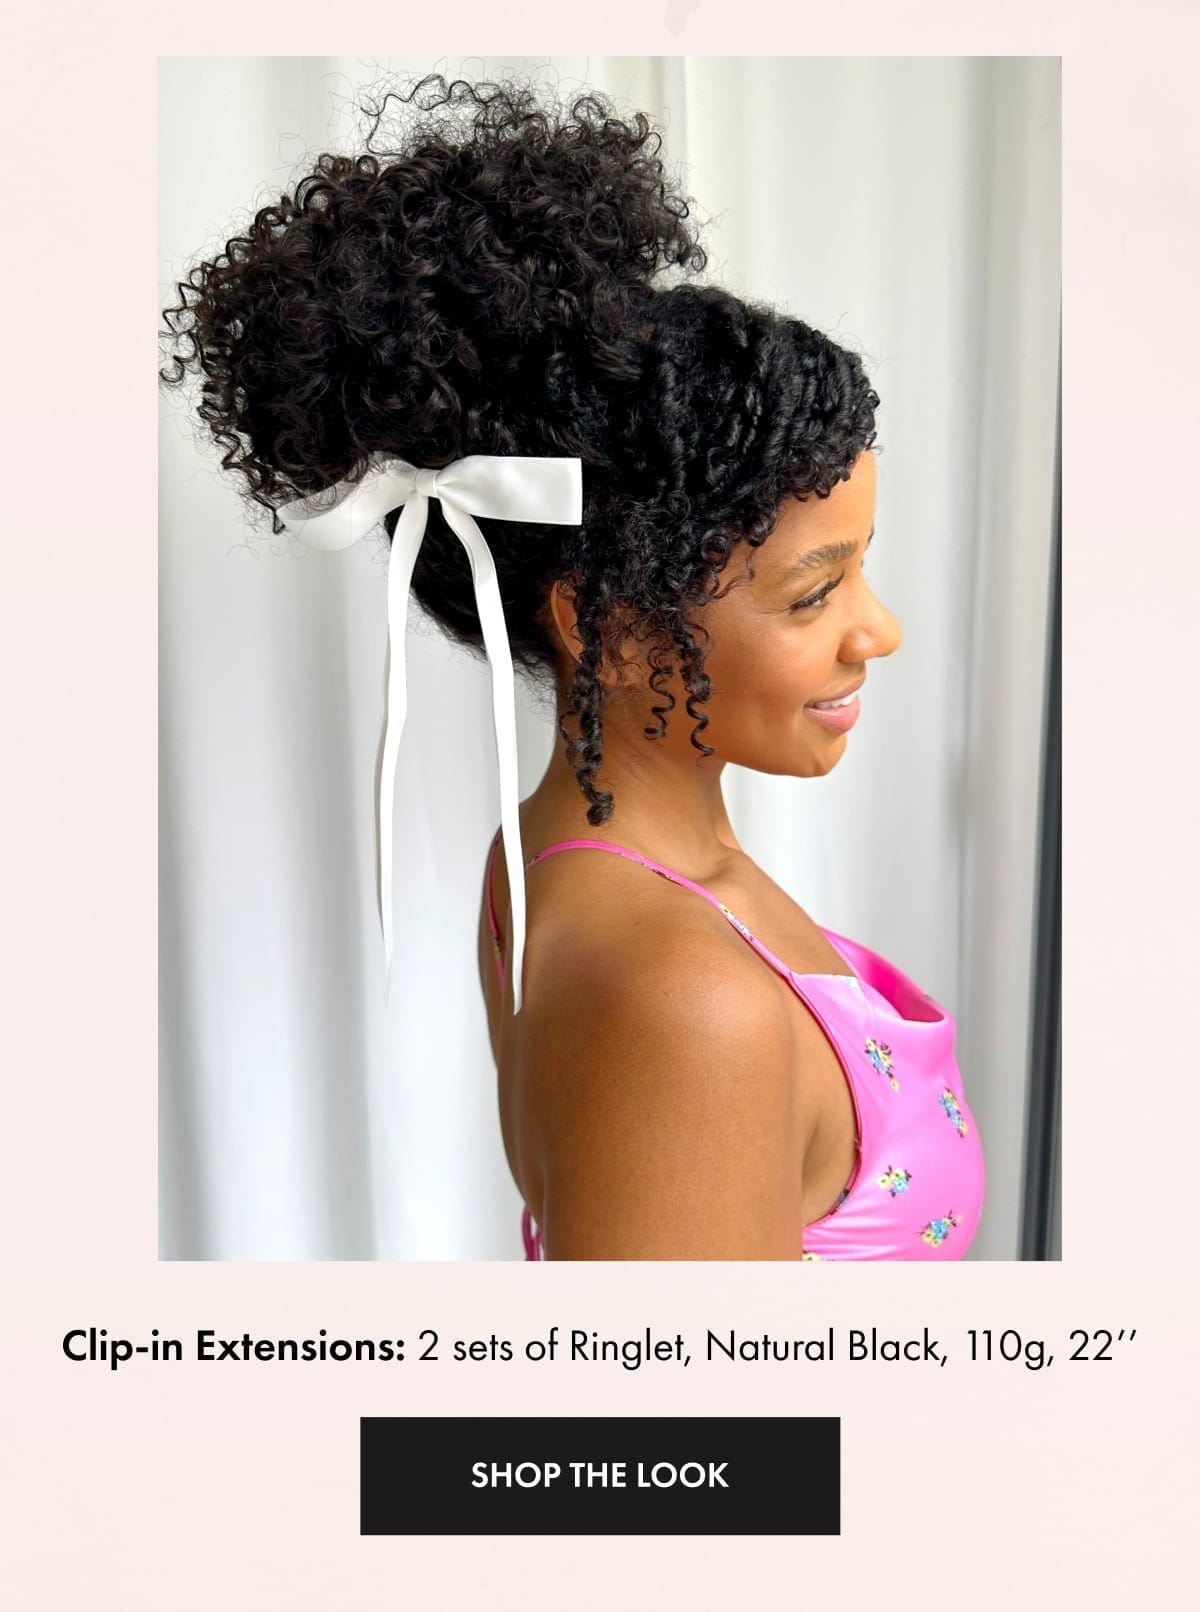 Clip-in Extensions: 2 Sets of Ringlet, Natural Black, 110g, 22''